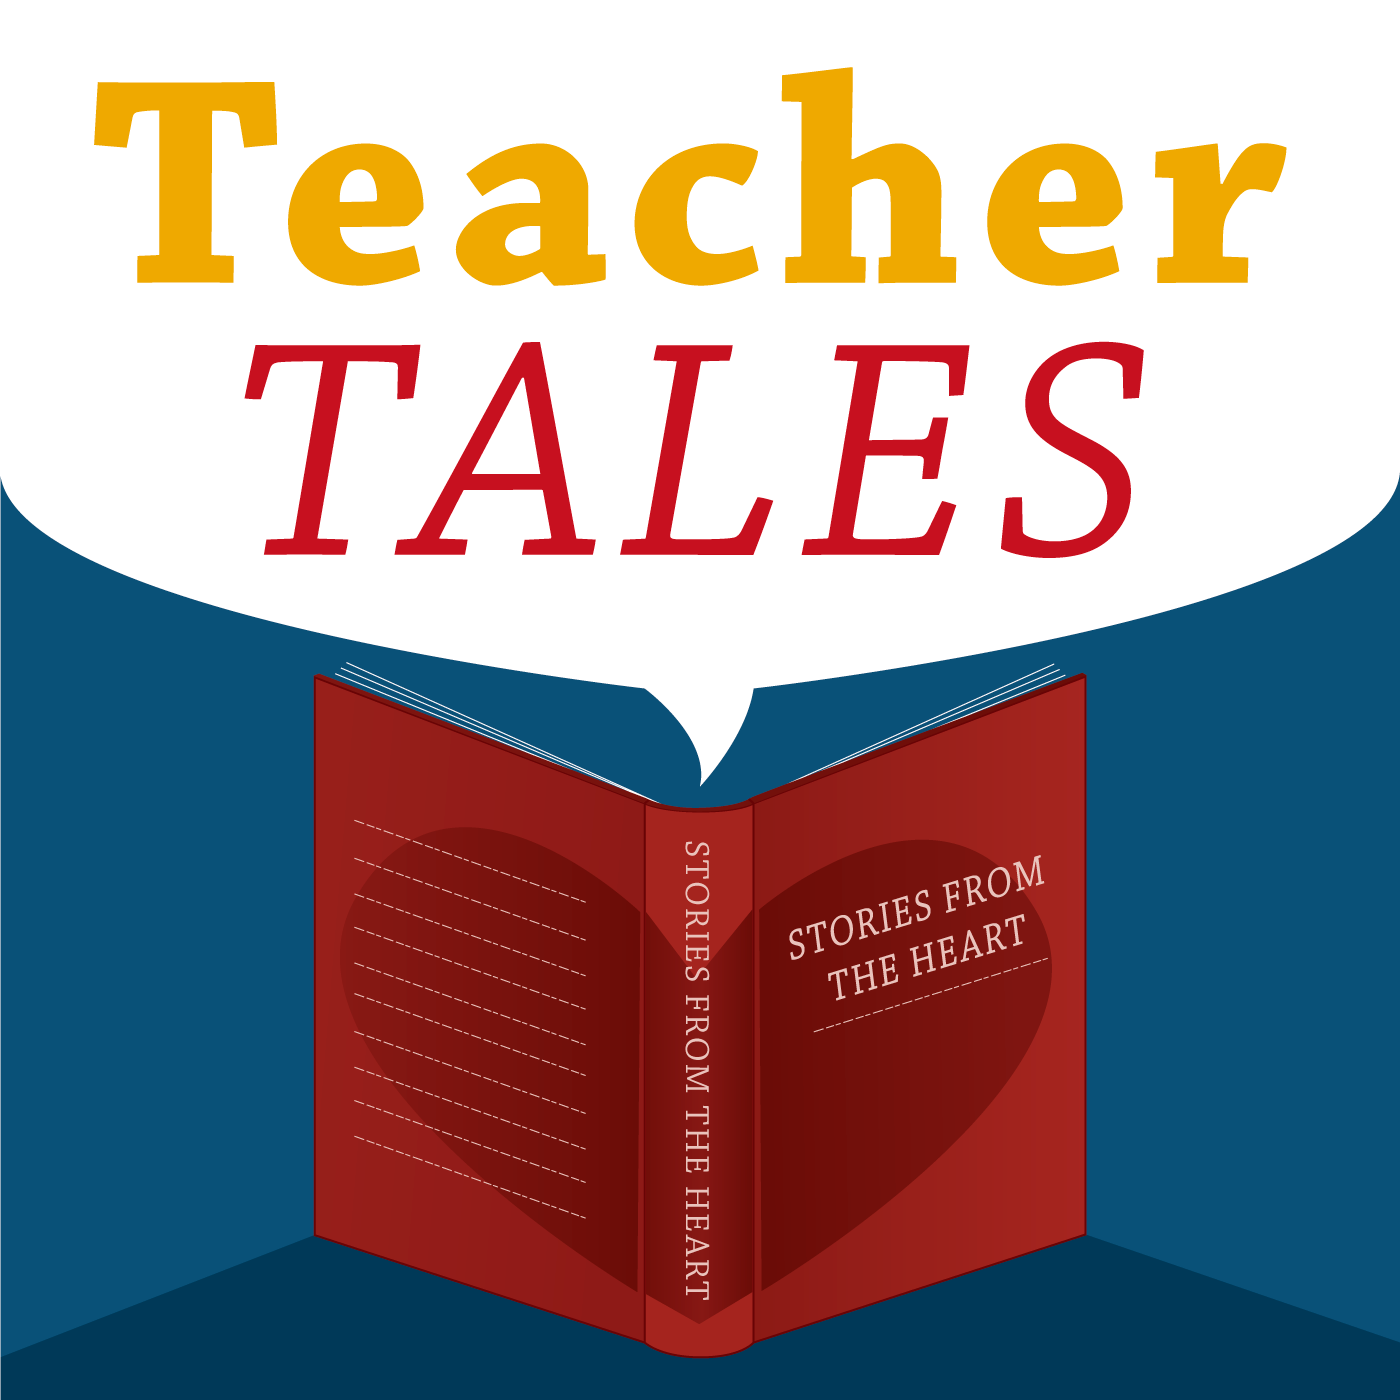 Teacher Tales #28 - The student voice and identity: Jessica, teacher advocate for social justice, language access and the rights of refugees and immigrants in schools and master “helper”